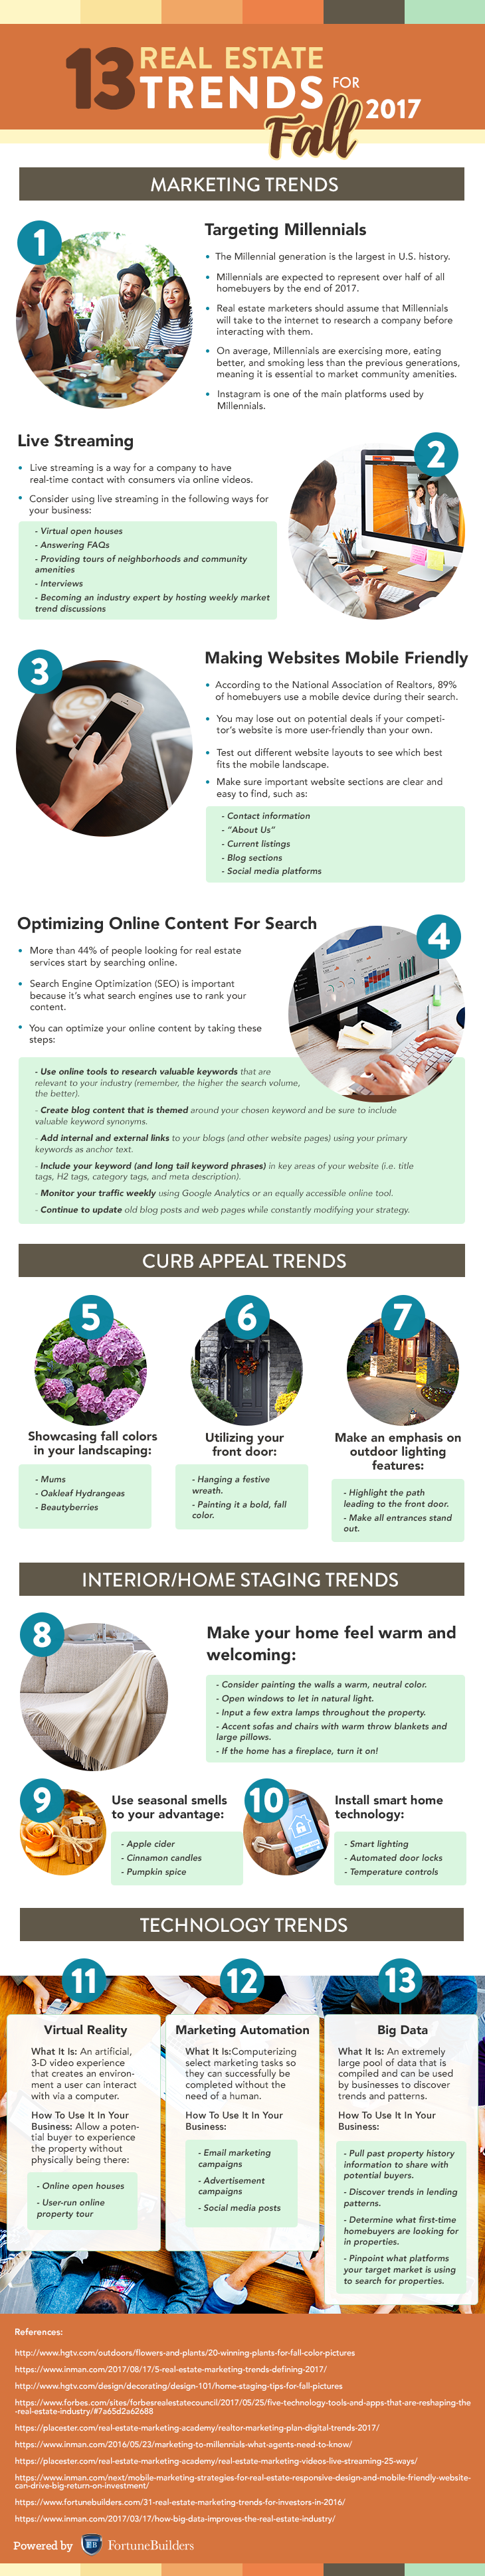 infographic-117-13-Real-Estate-Trends-For-Fall-2017